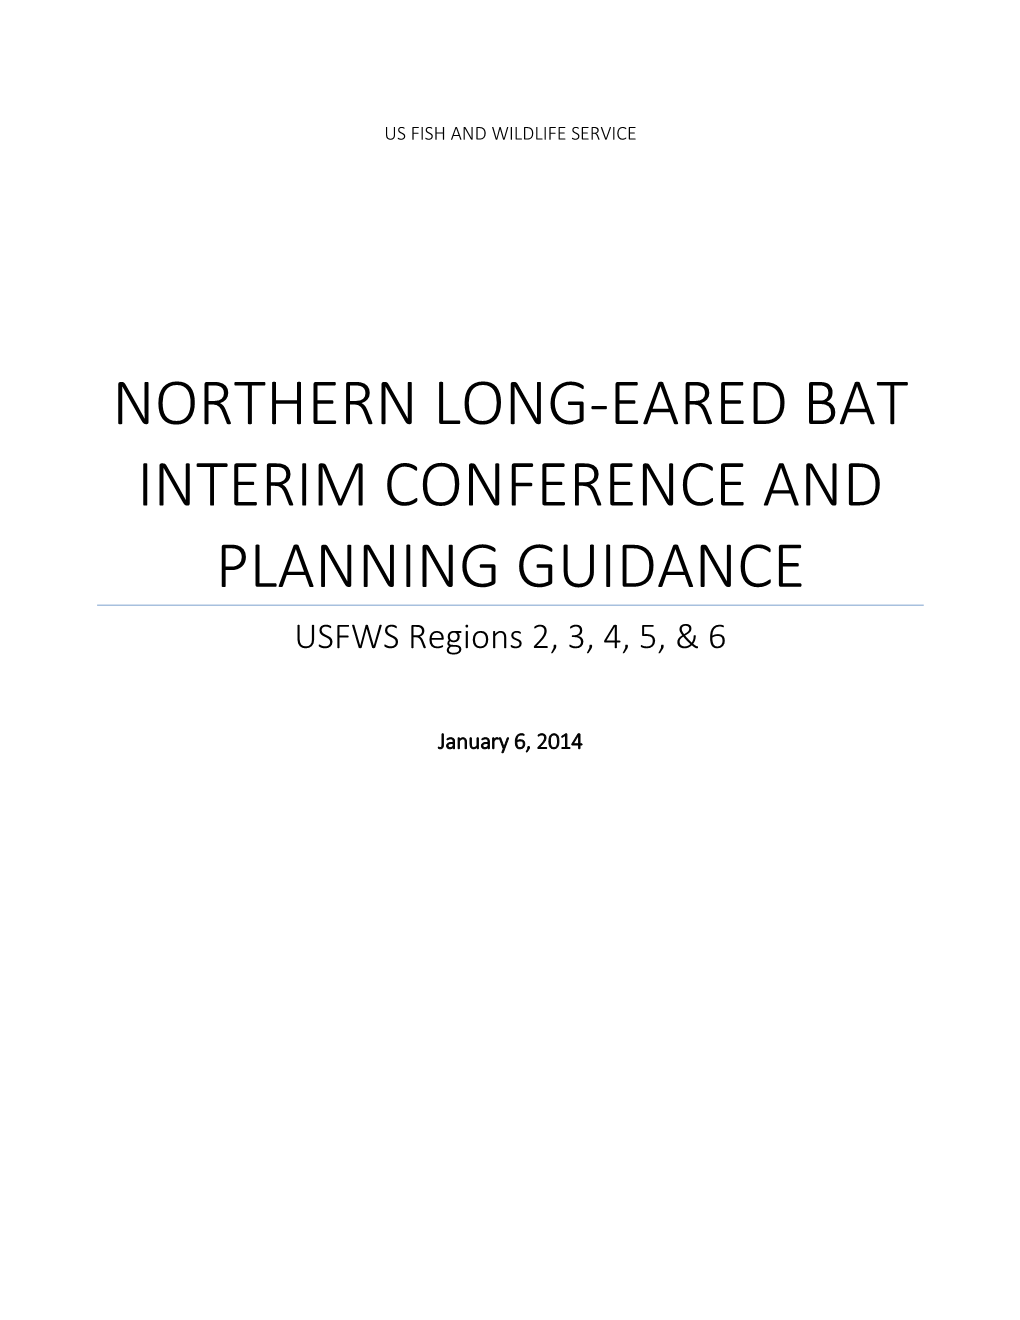 NORTHERN LONG-EARED BAT INTERIM CONFERENCE and PLANNING GUIDANCE USFWS Regions 2, 3, 4, 5, & 6